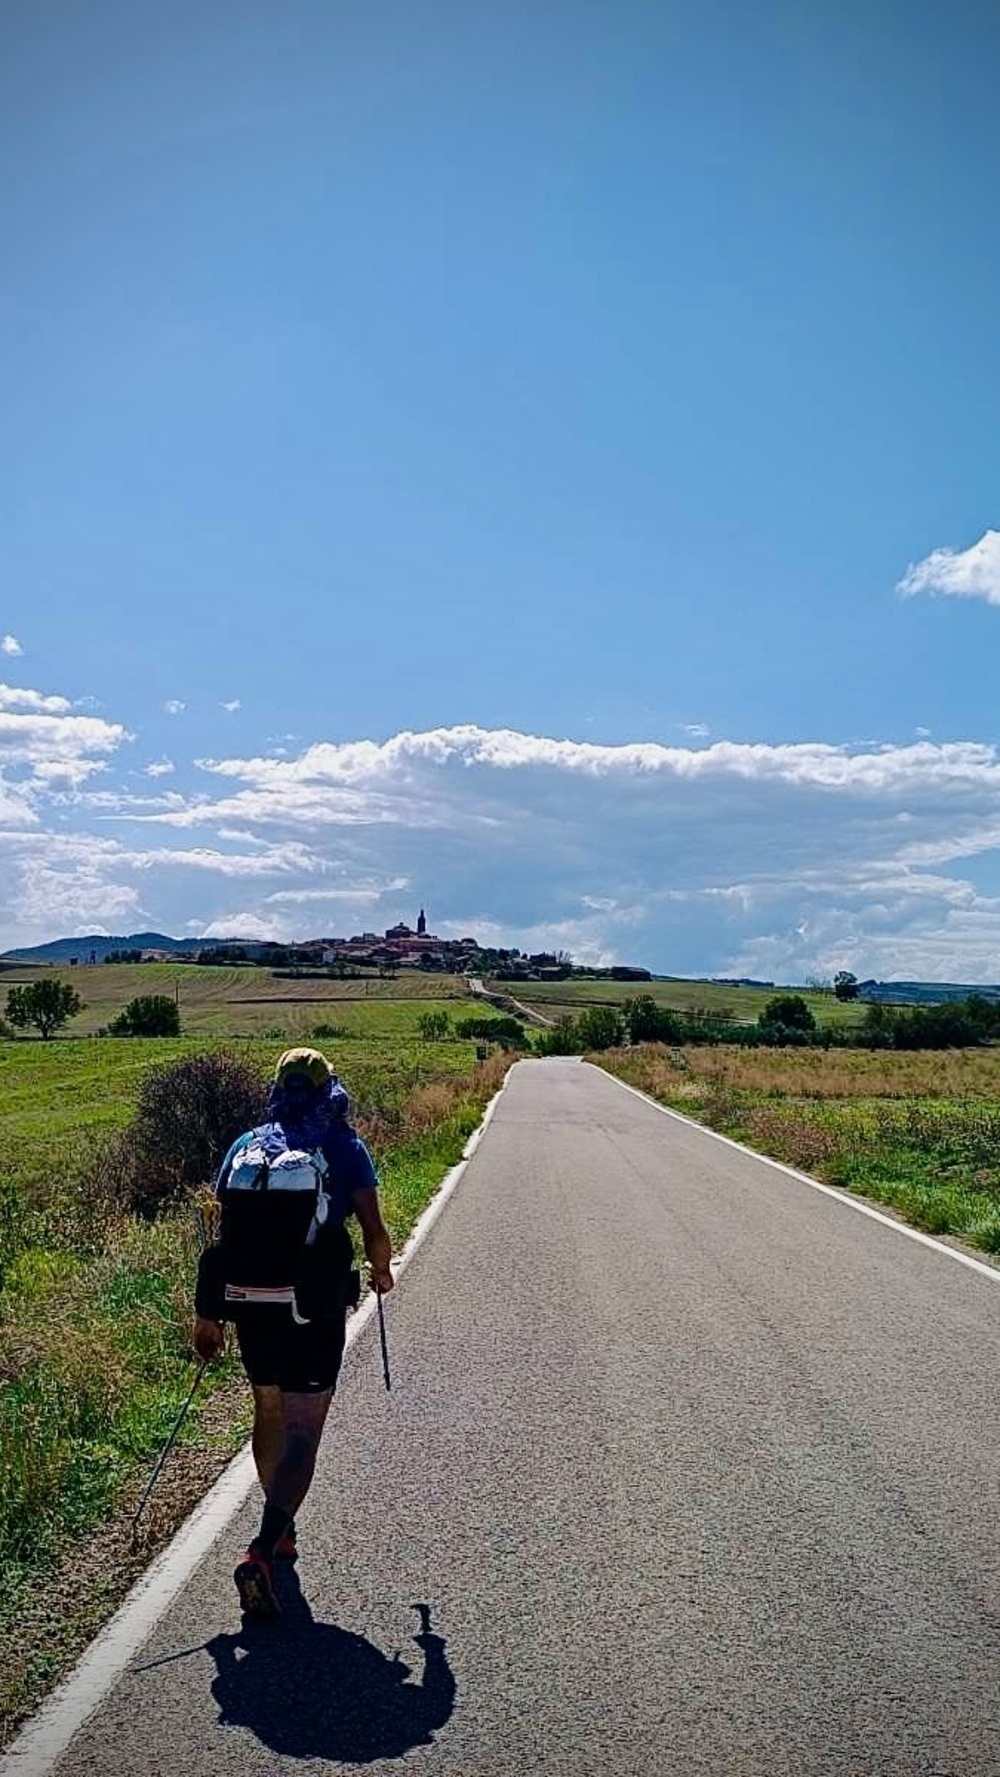 A hiker with a large backpack walks along a road toward a village with visible church spires, set in a rural landscape under a bright, cloudy sky.